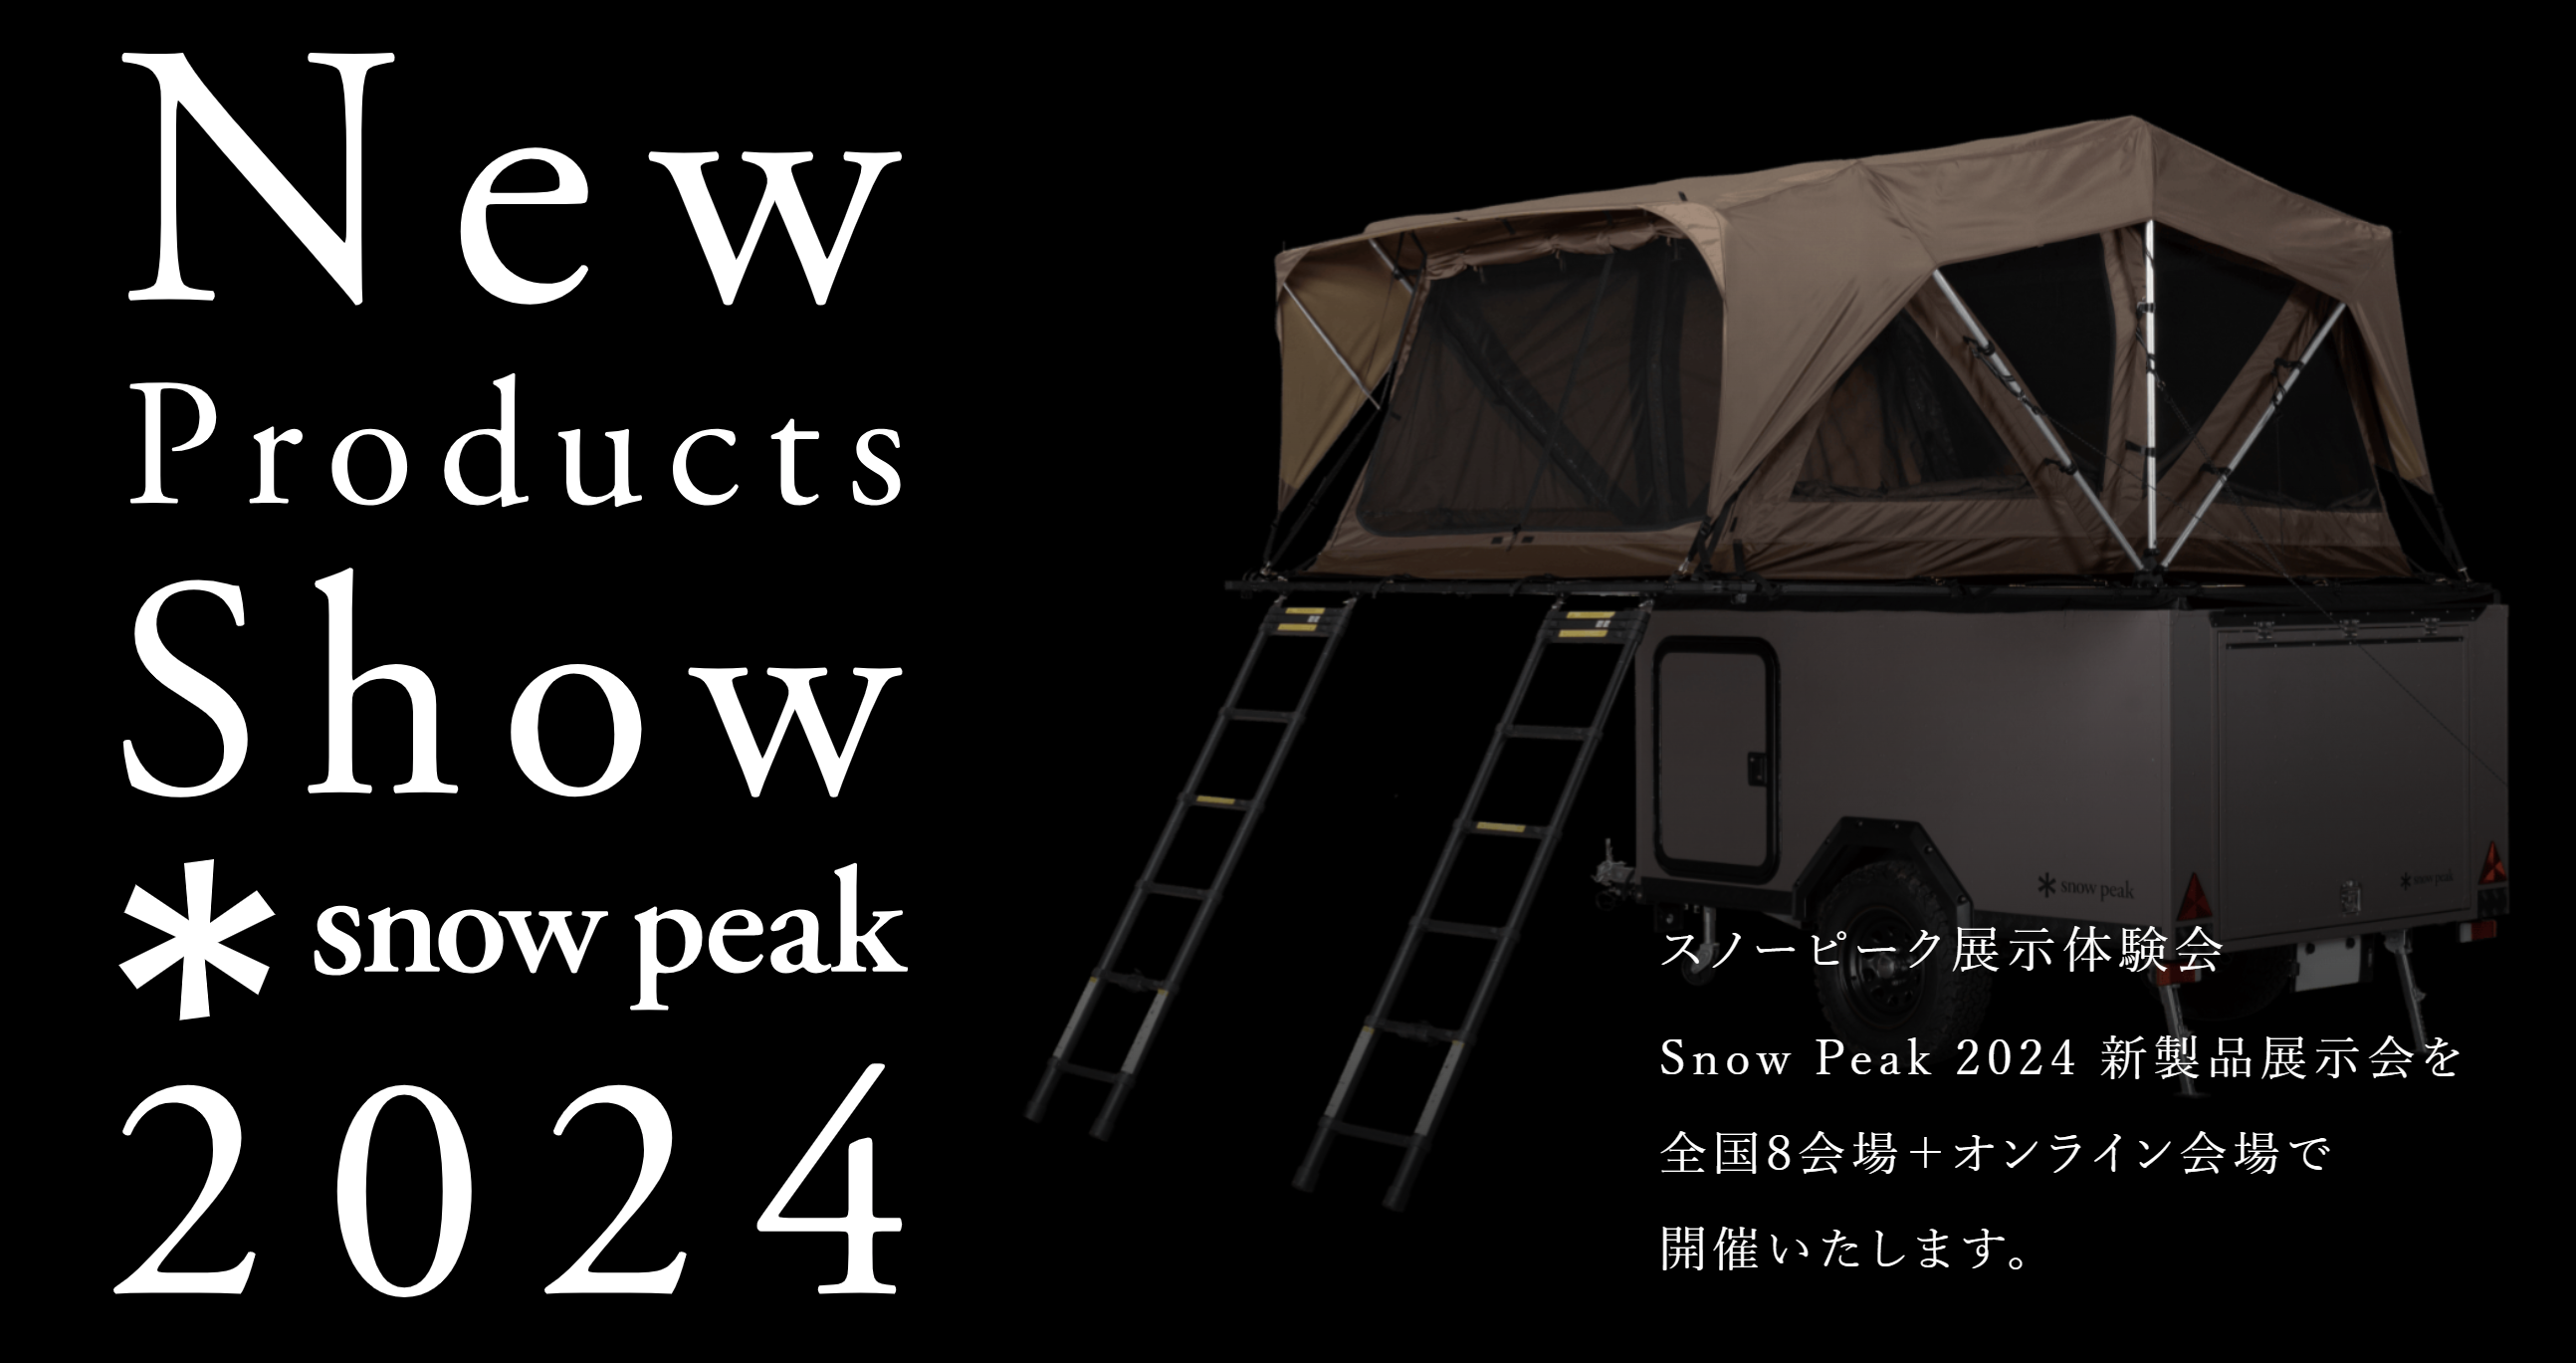 //New Products Show 2024のご案内// 